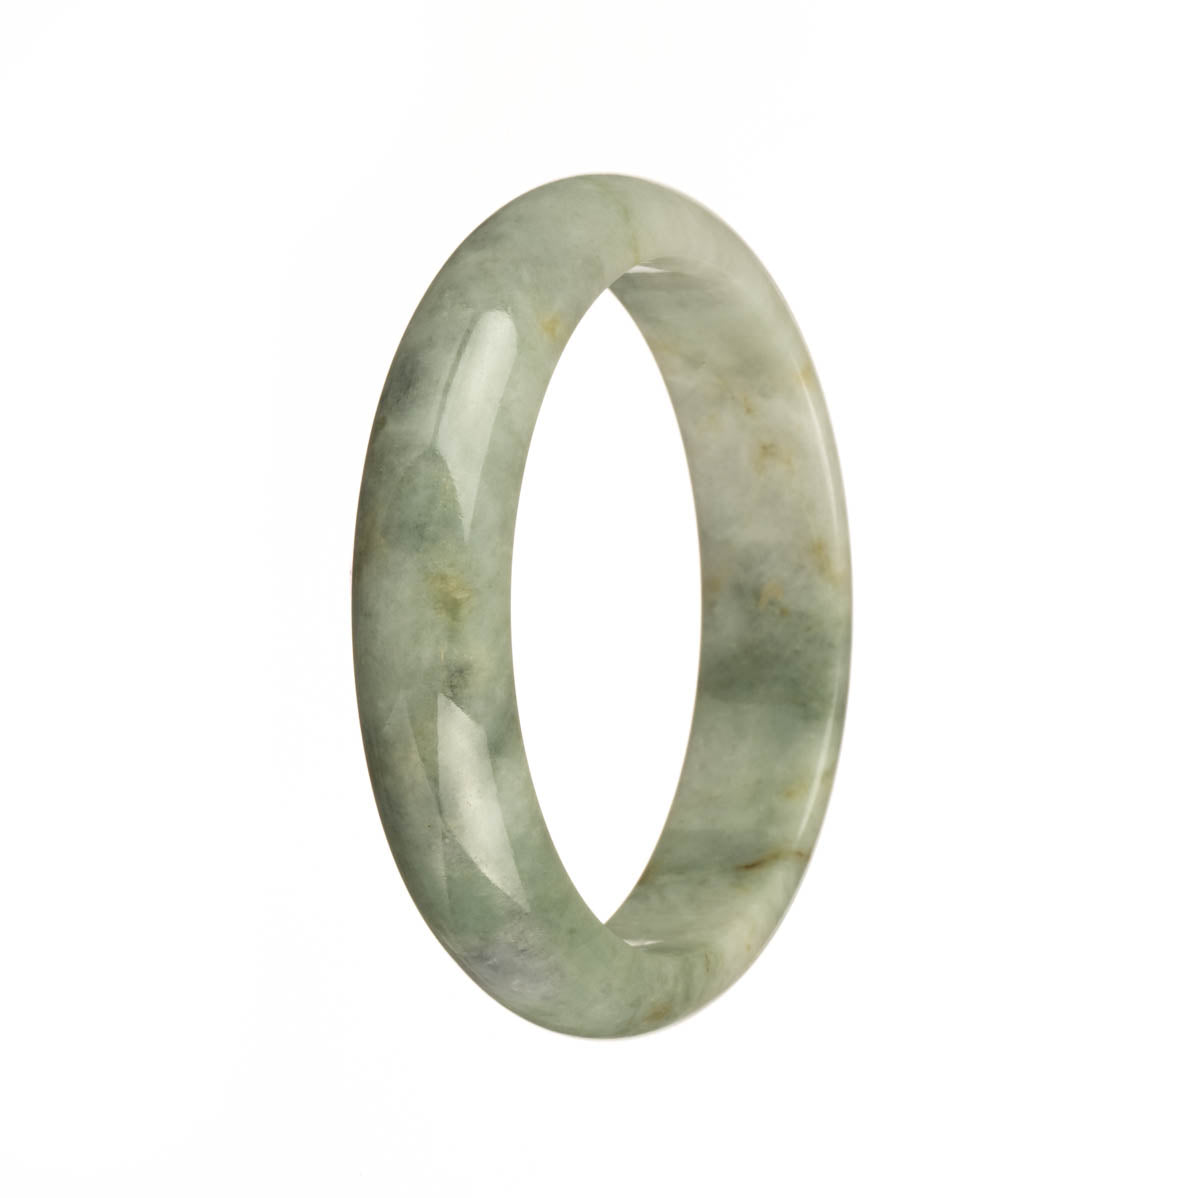 Authentic Natural White with Green Pattern Burma Jade Bangle Bracelet - 55mm Half Moon